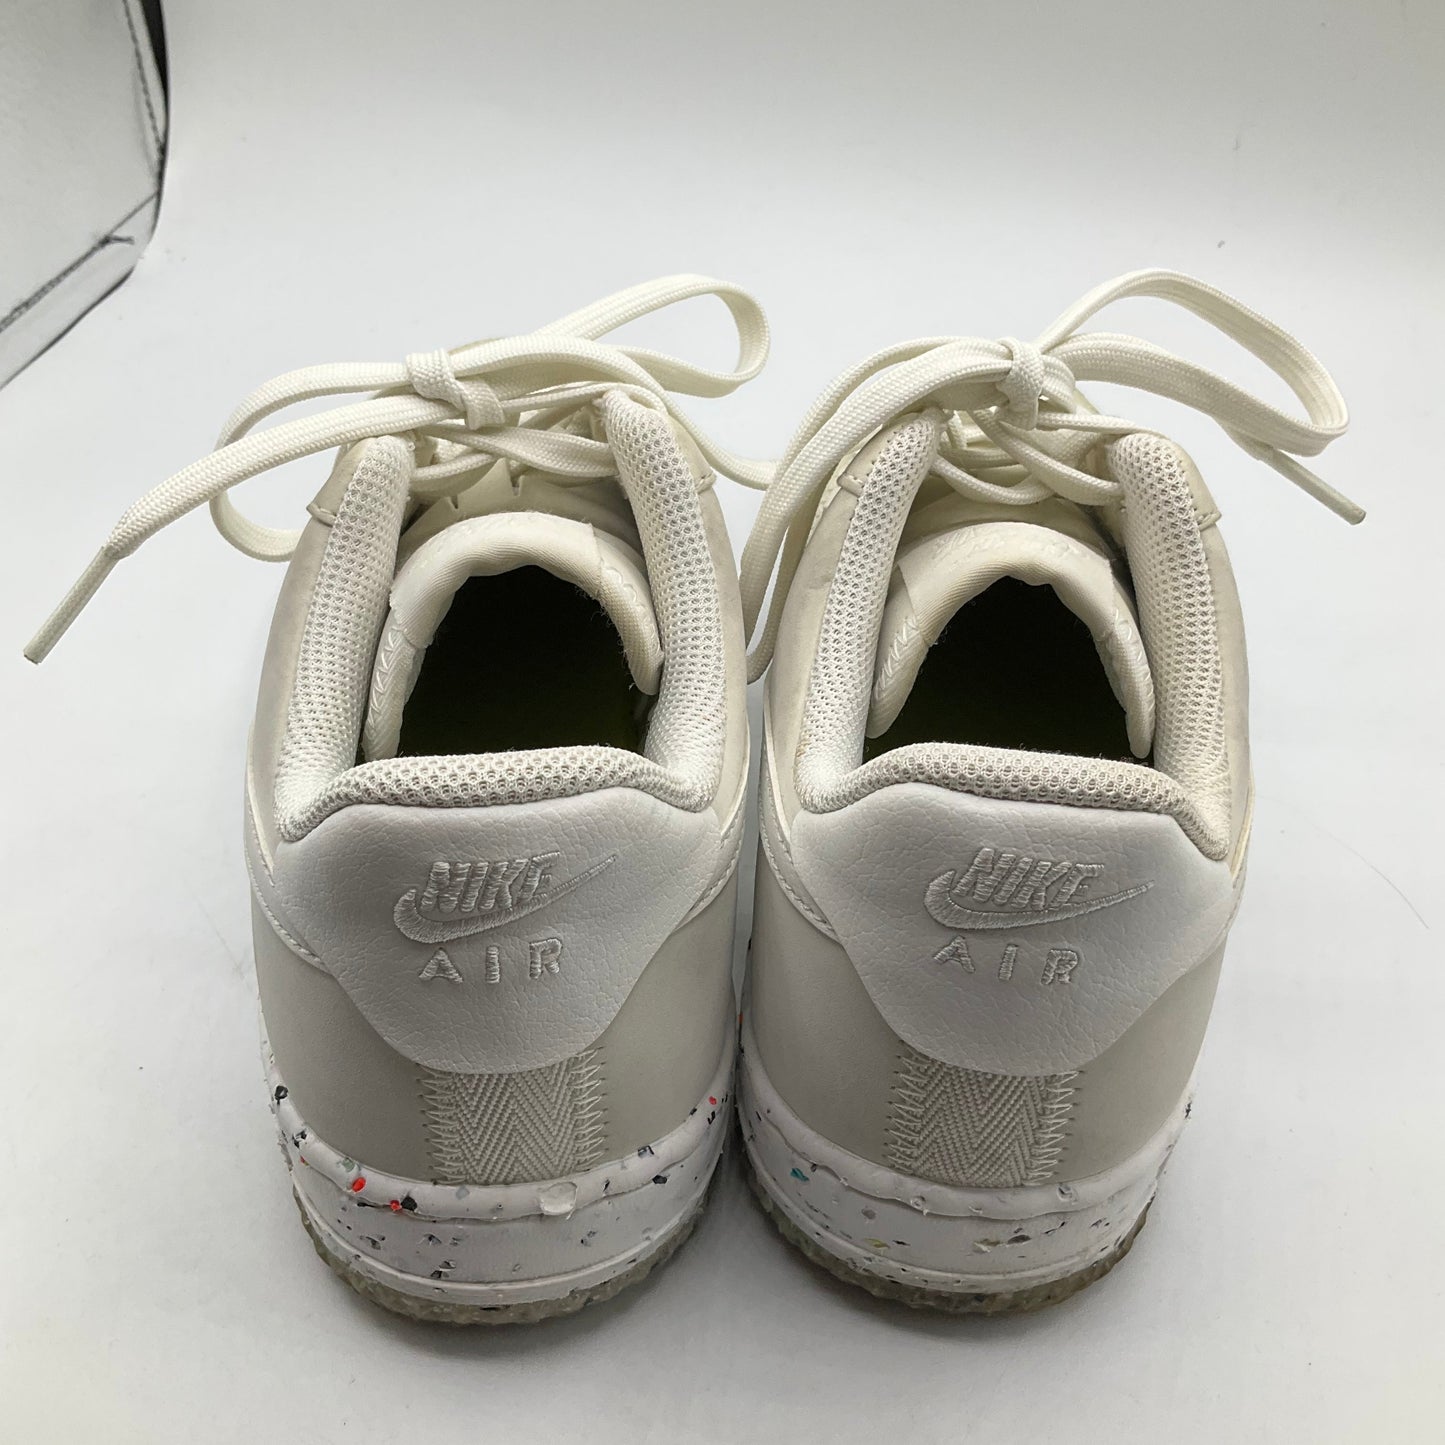 White Shoes Sneakers Nike, Size 7